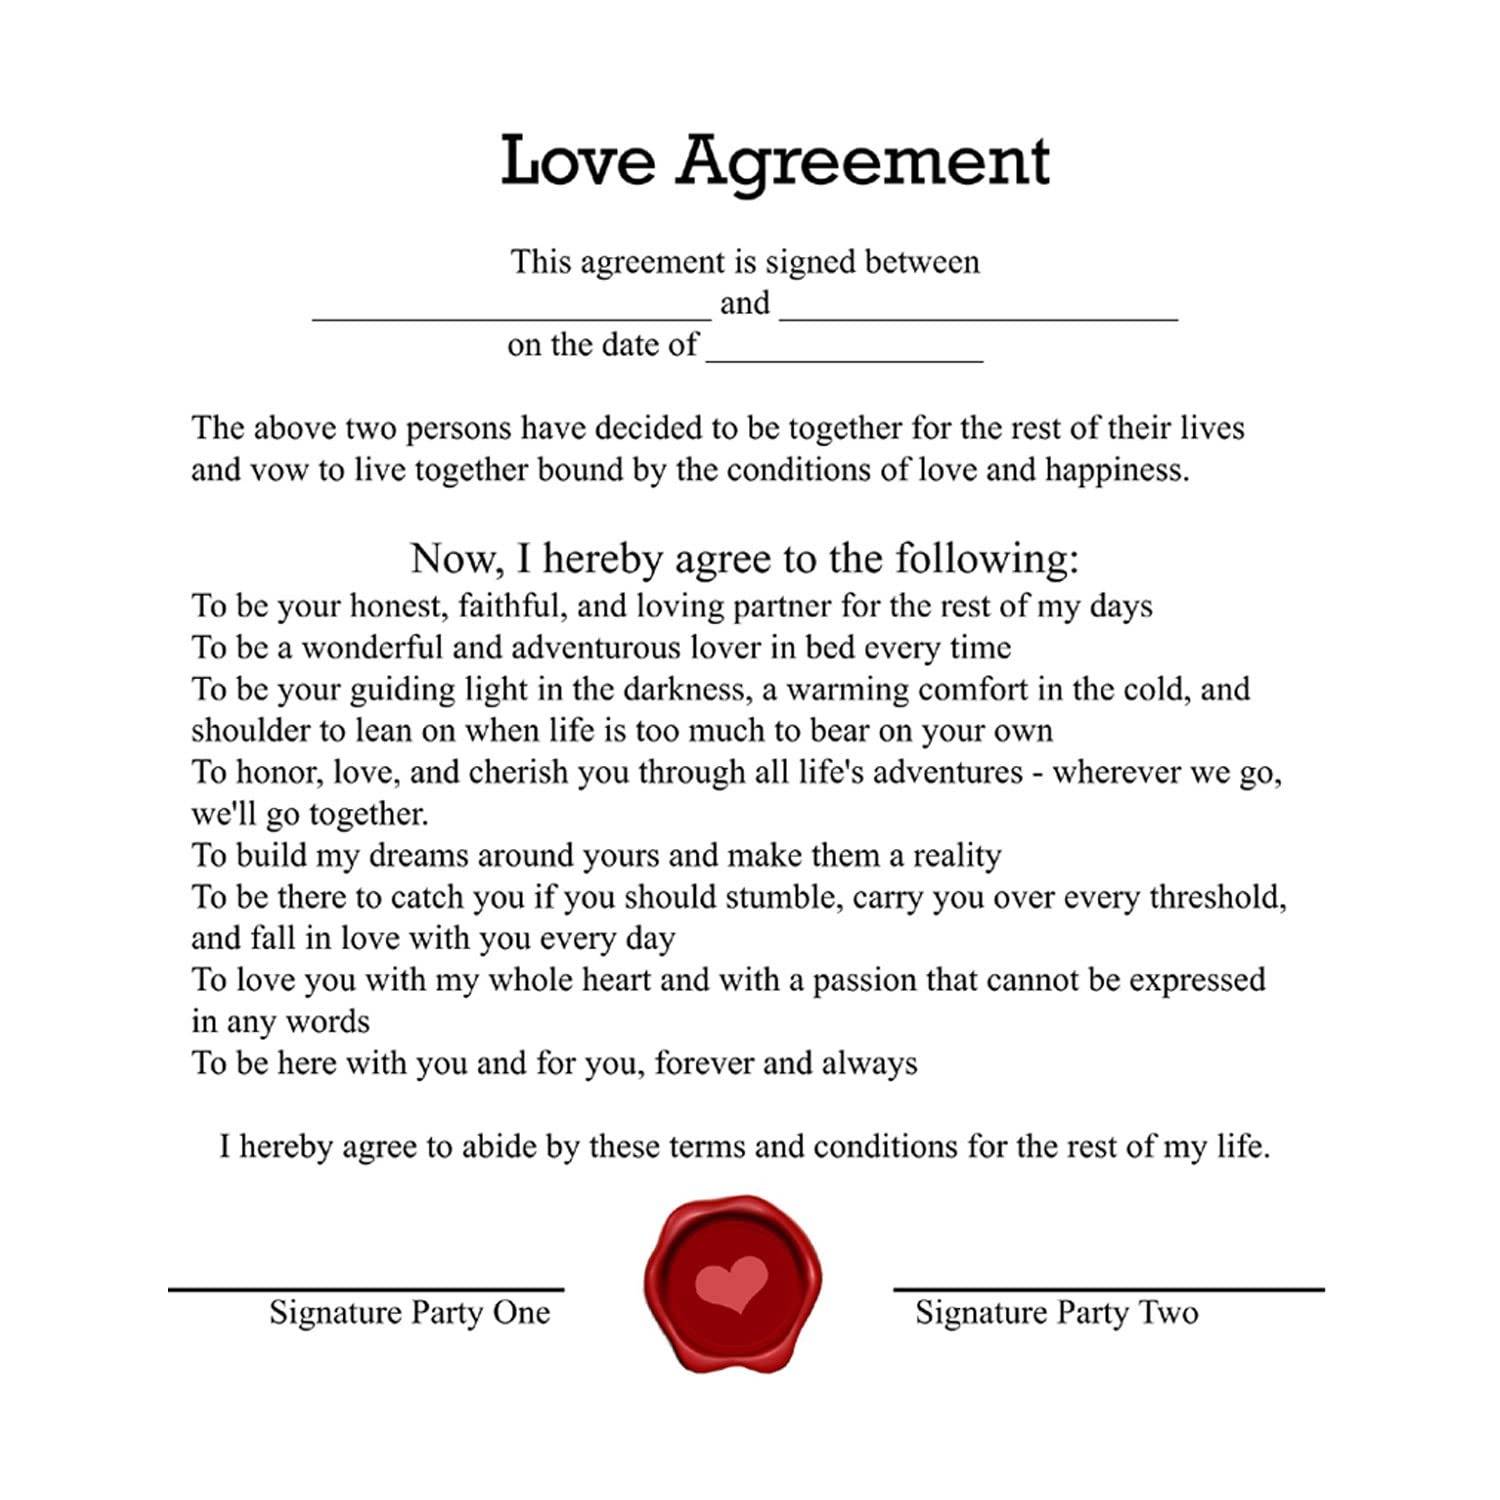 Friendship Contract Size: A4 Highly glossy and thick sheet #giftideas # contract #agreement #friendship #friendshipgoals #bff #fun… | Instagram